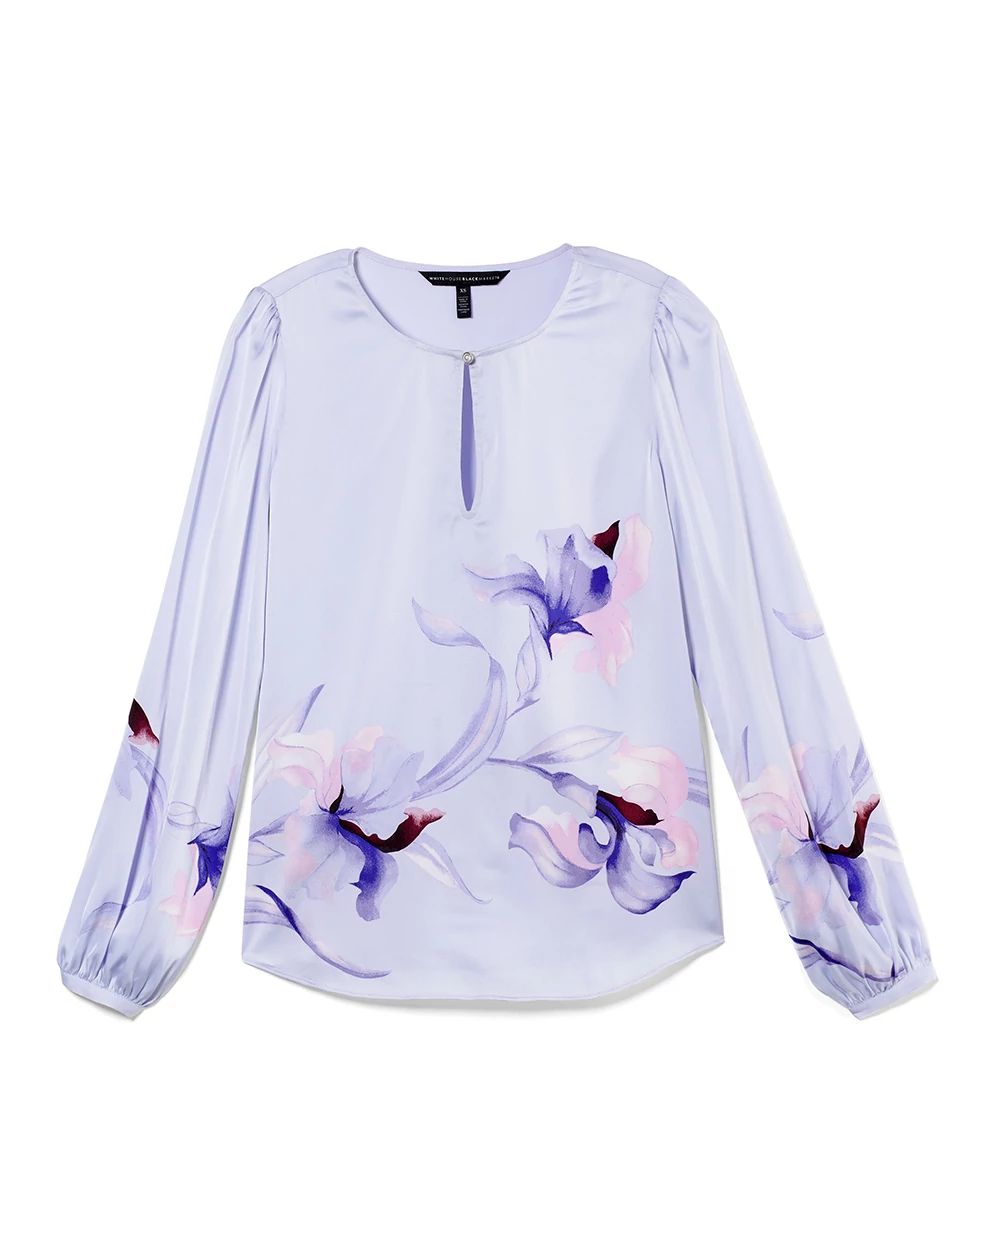 Long Sleeve Iris Print Blouse click to view larger image.